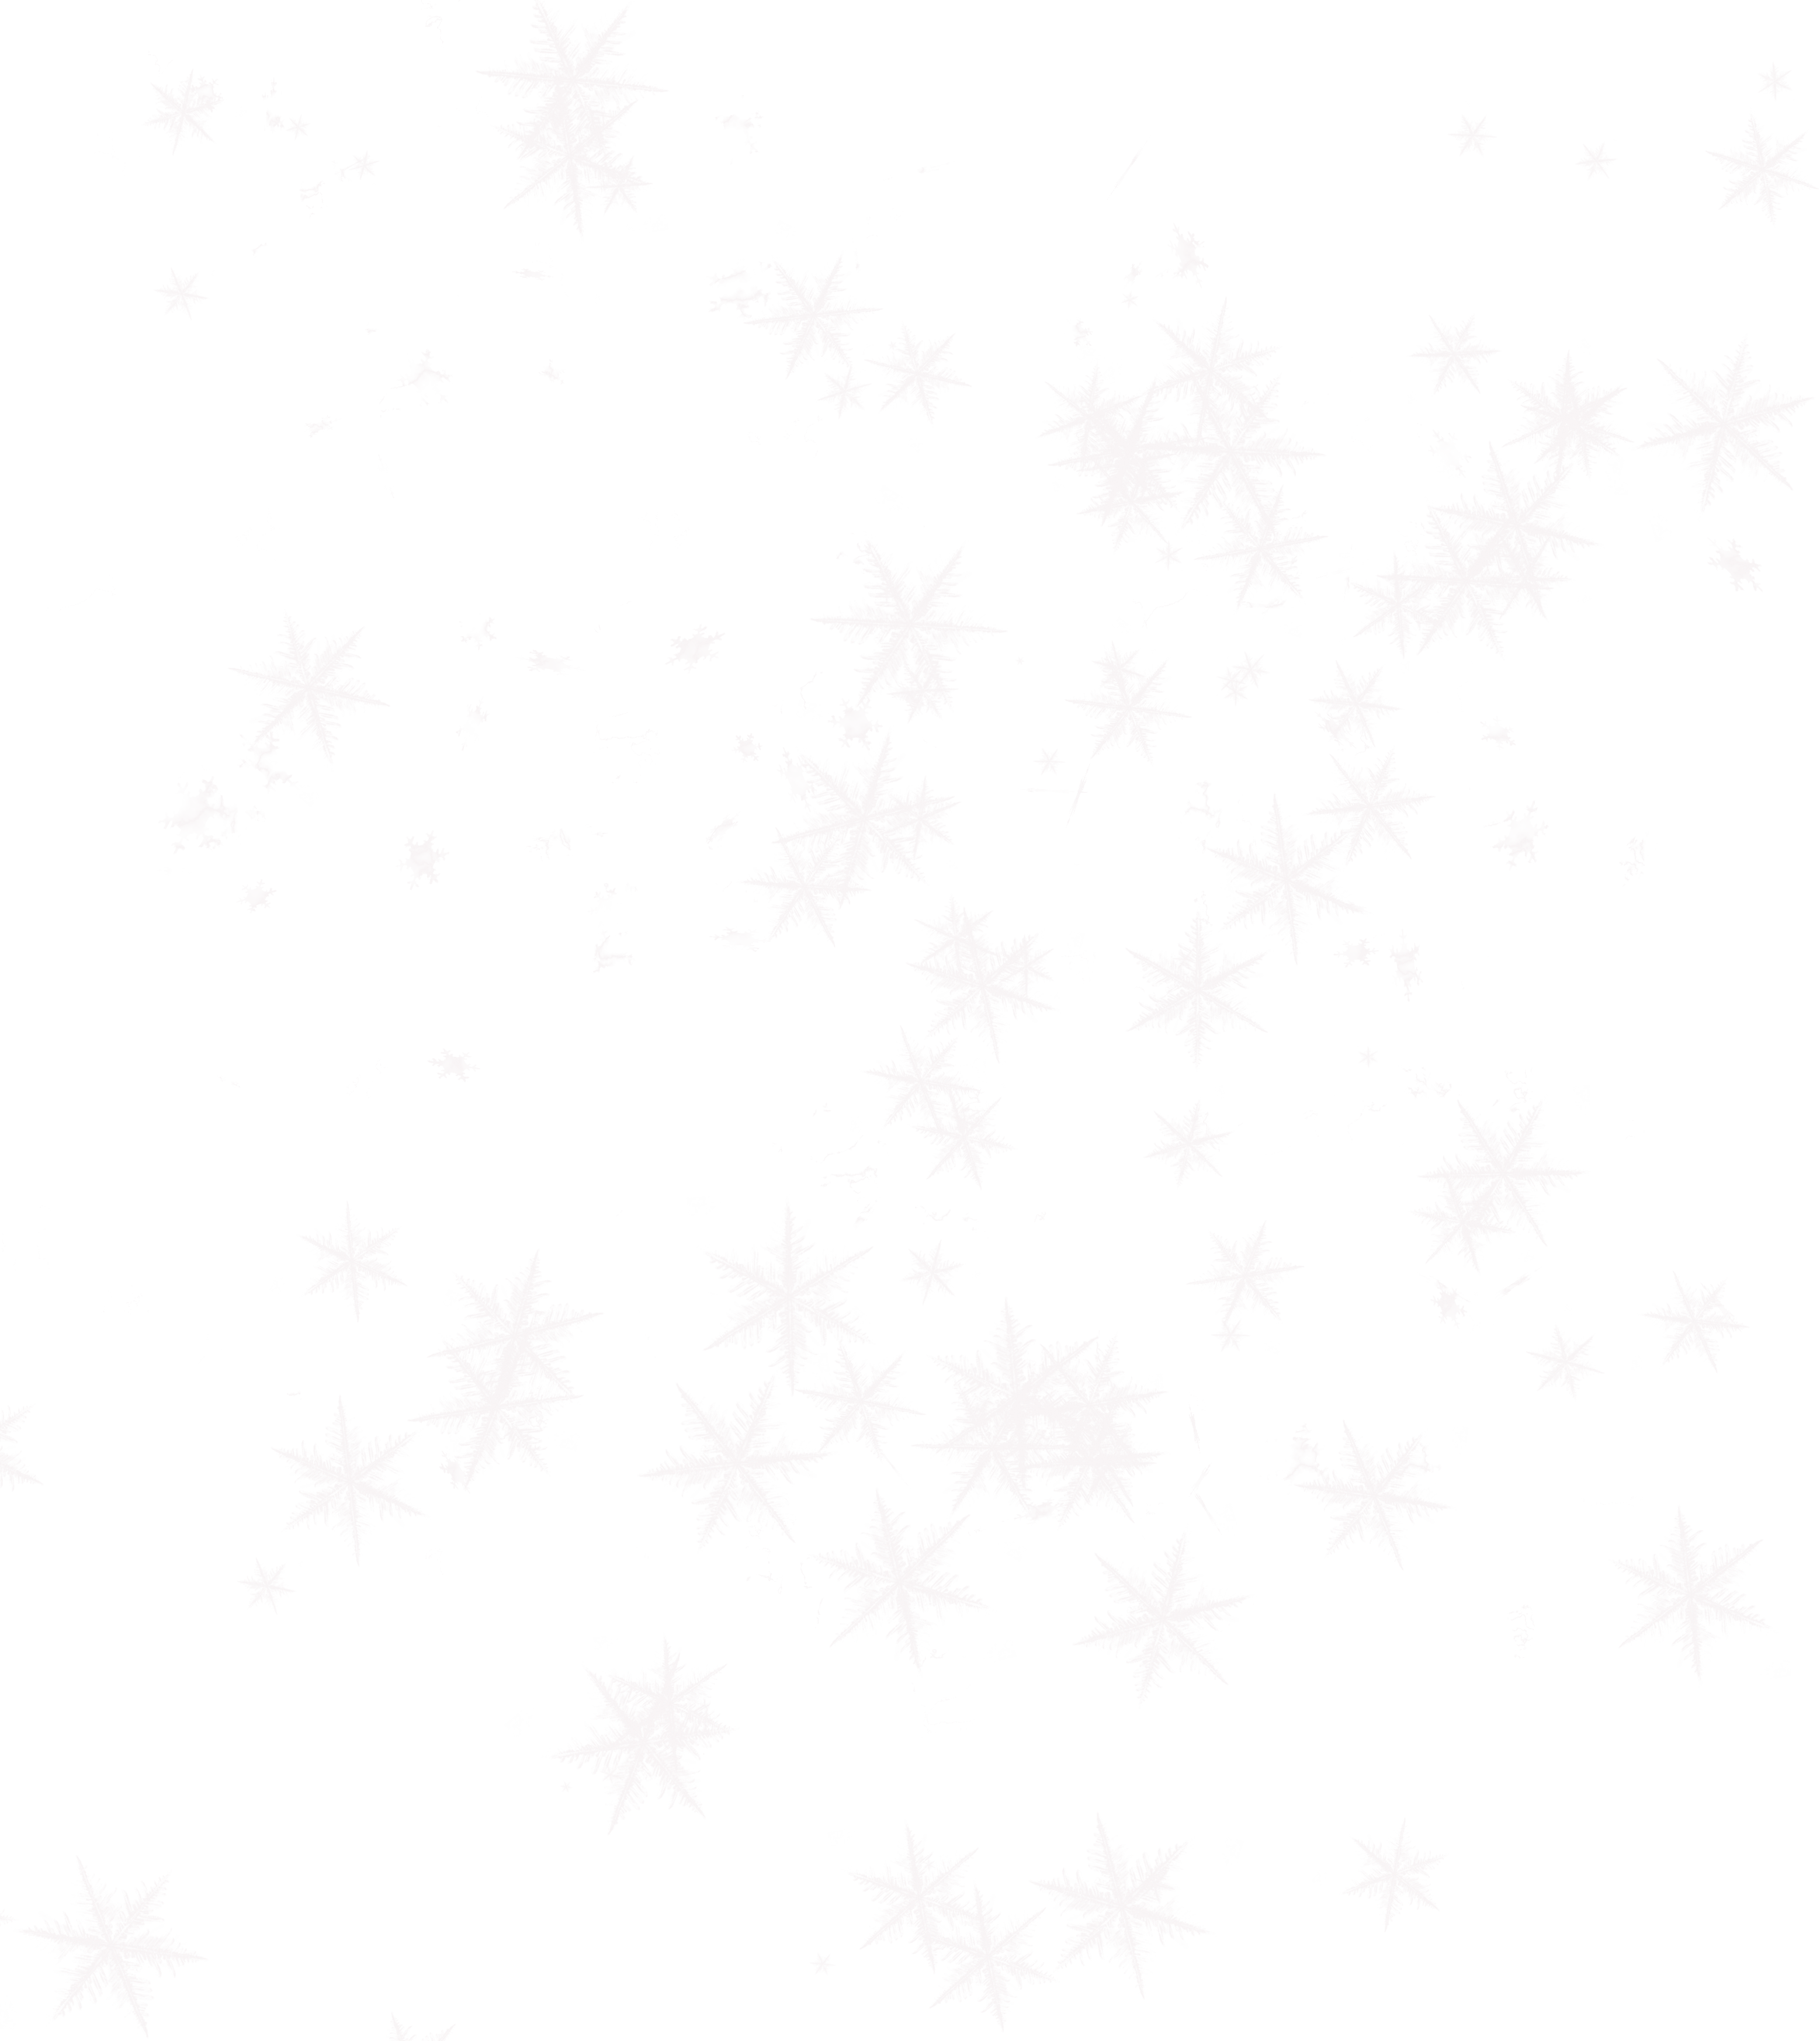 Download Snowflake Png Image HQ PNG Image in different resolution